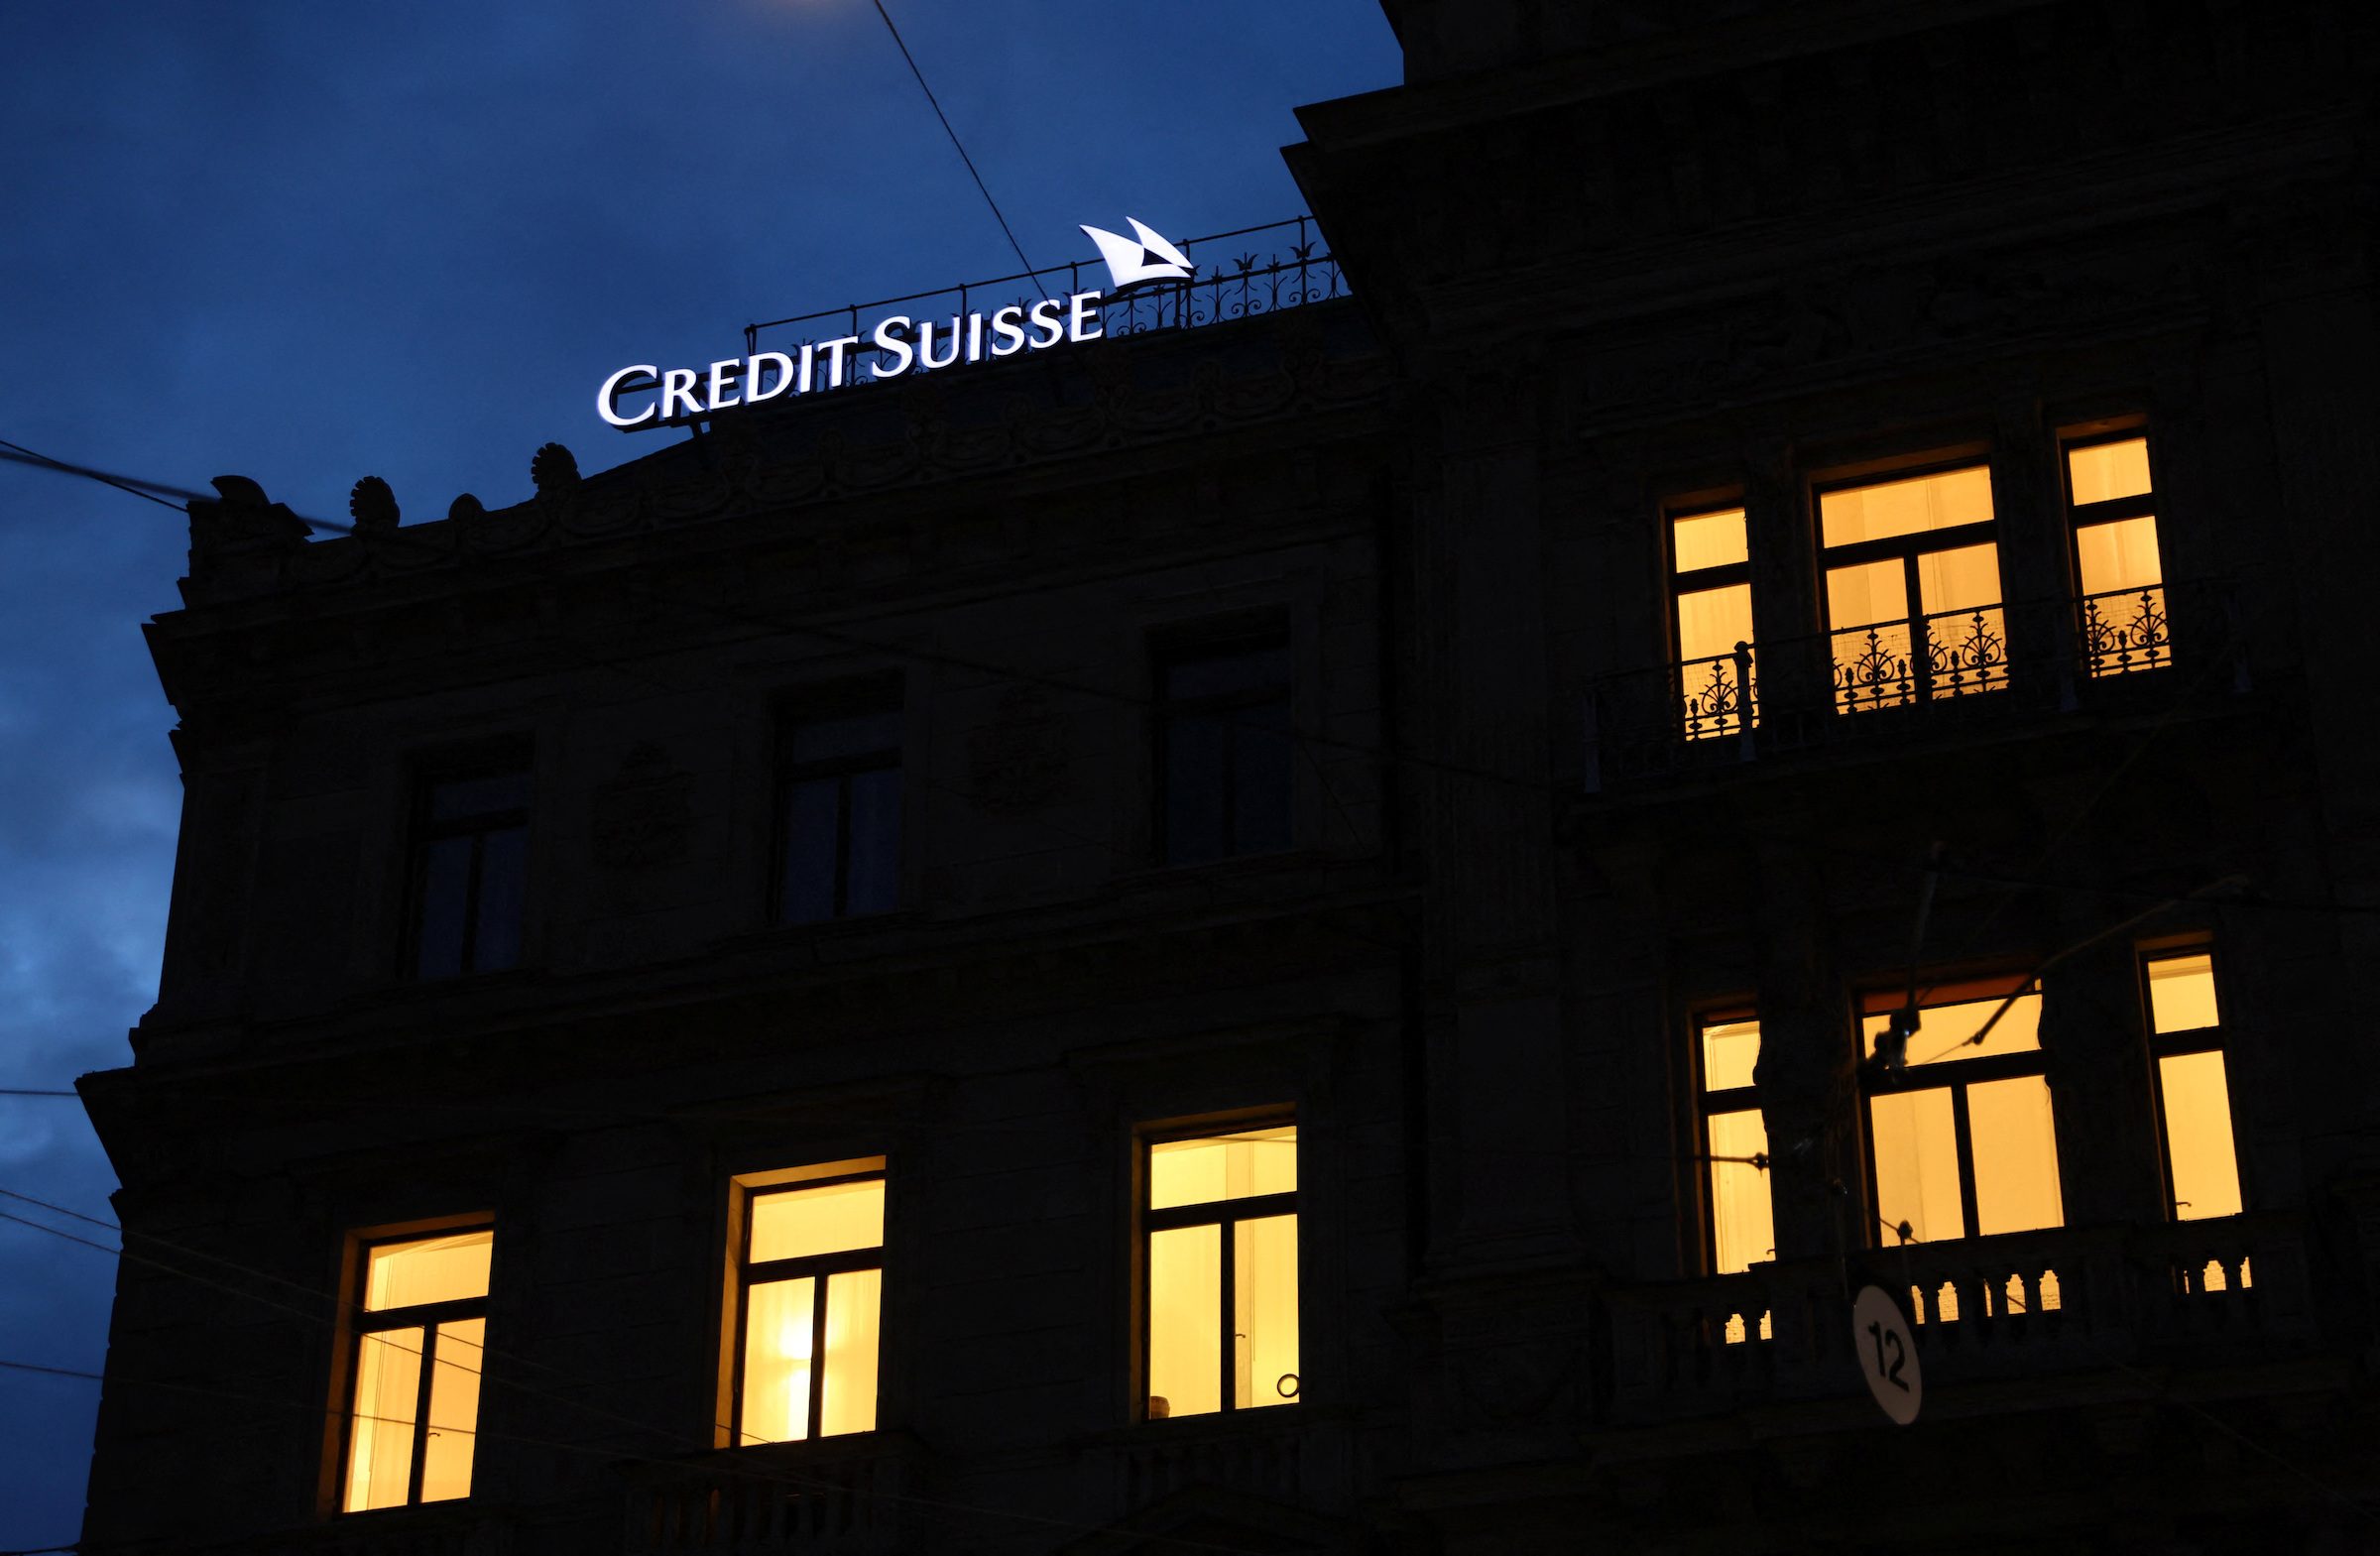 Credit Suisse could face disciplinary action, Swiss regulator says